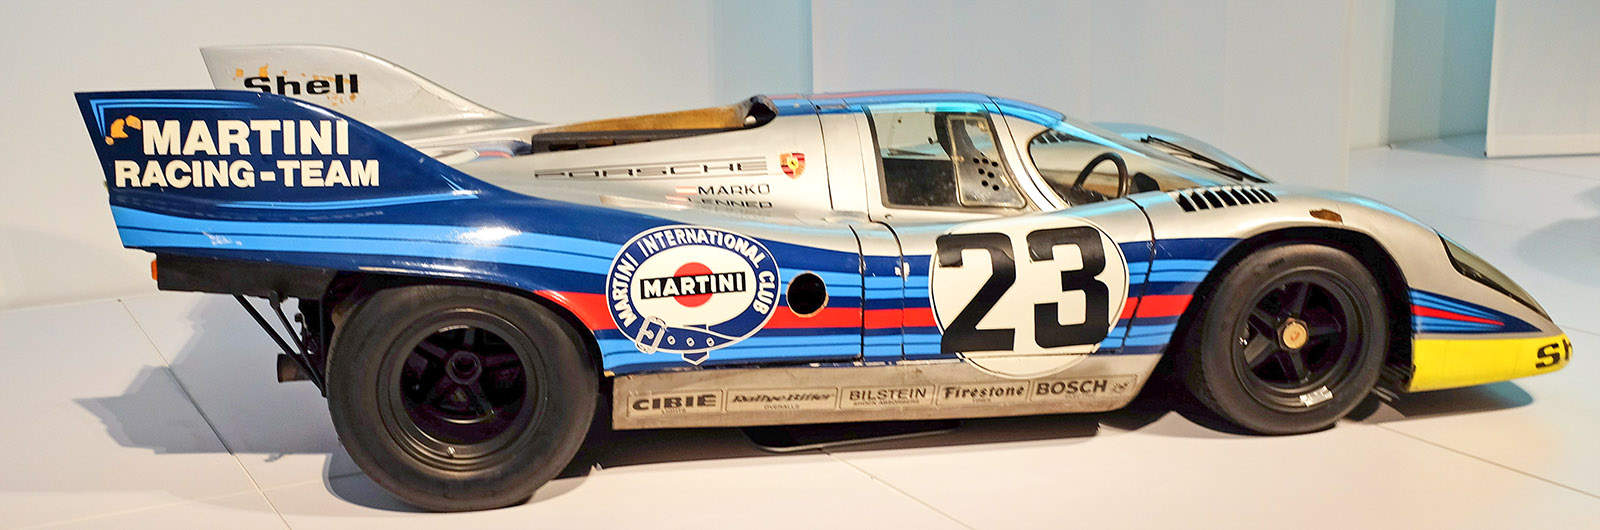 The car that won the 1971 edition of the 24 Hours of Le Mans: A Type 971K driven by Helmut Marko and Gijs van Lennep